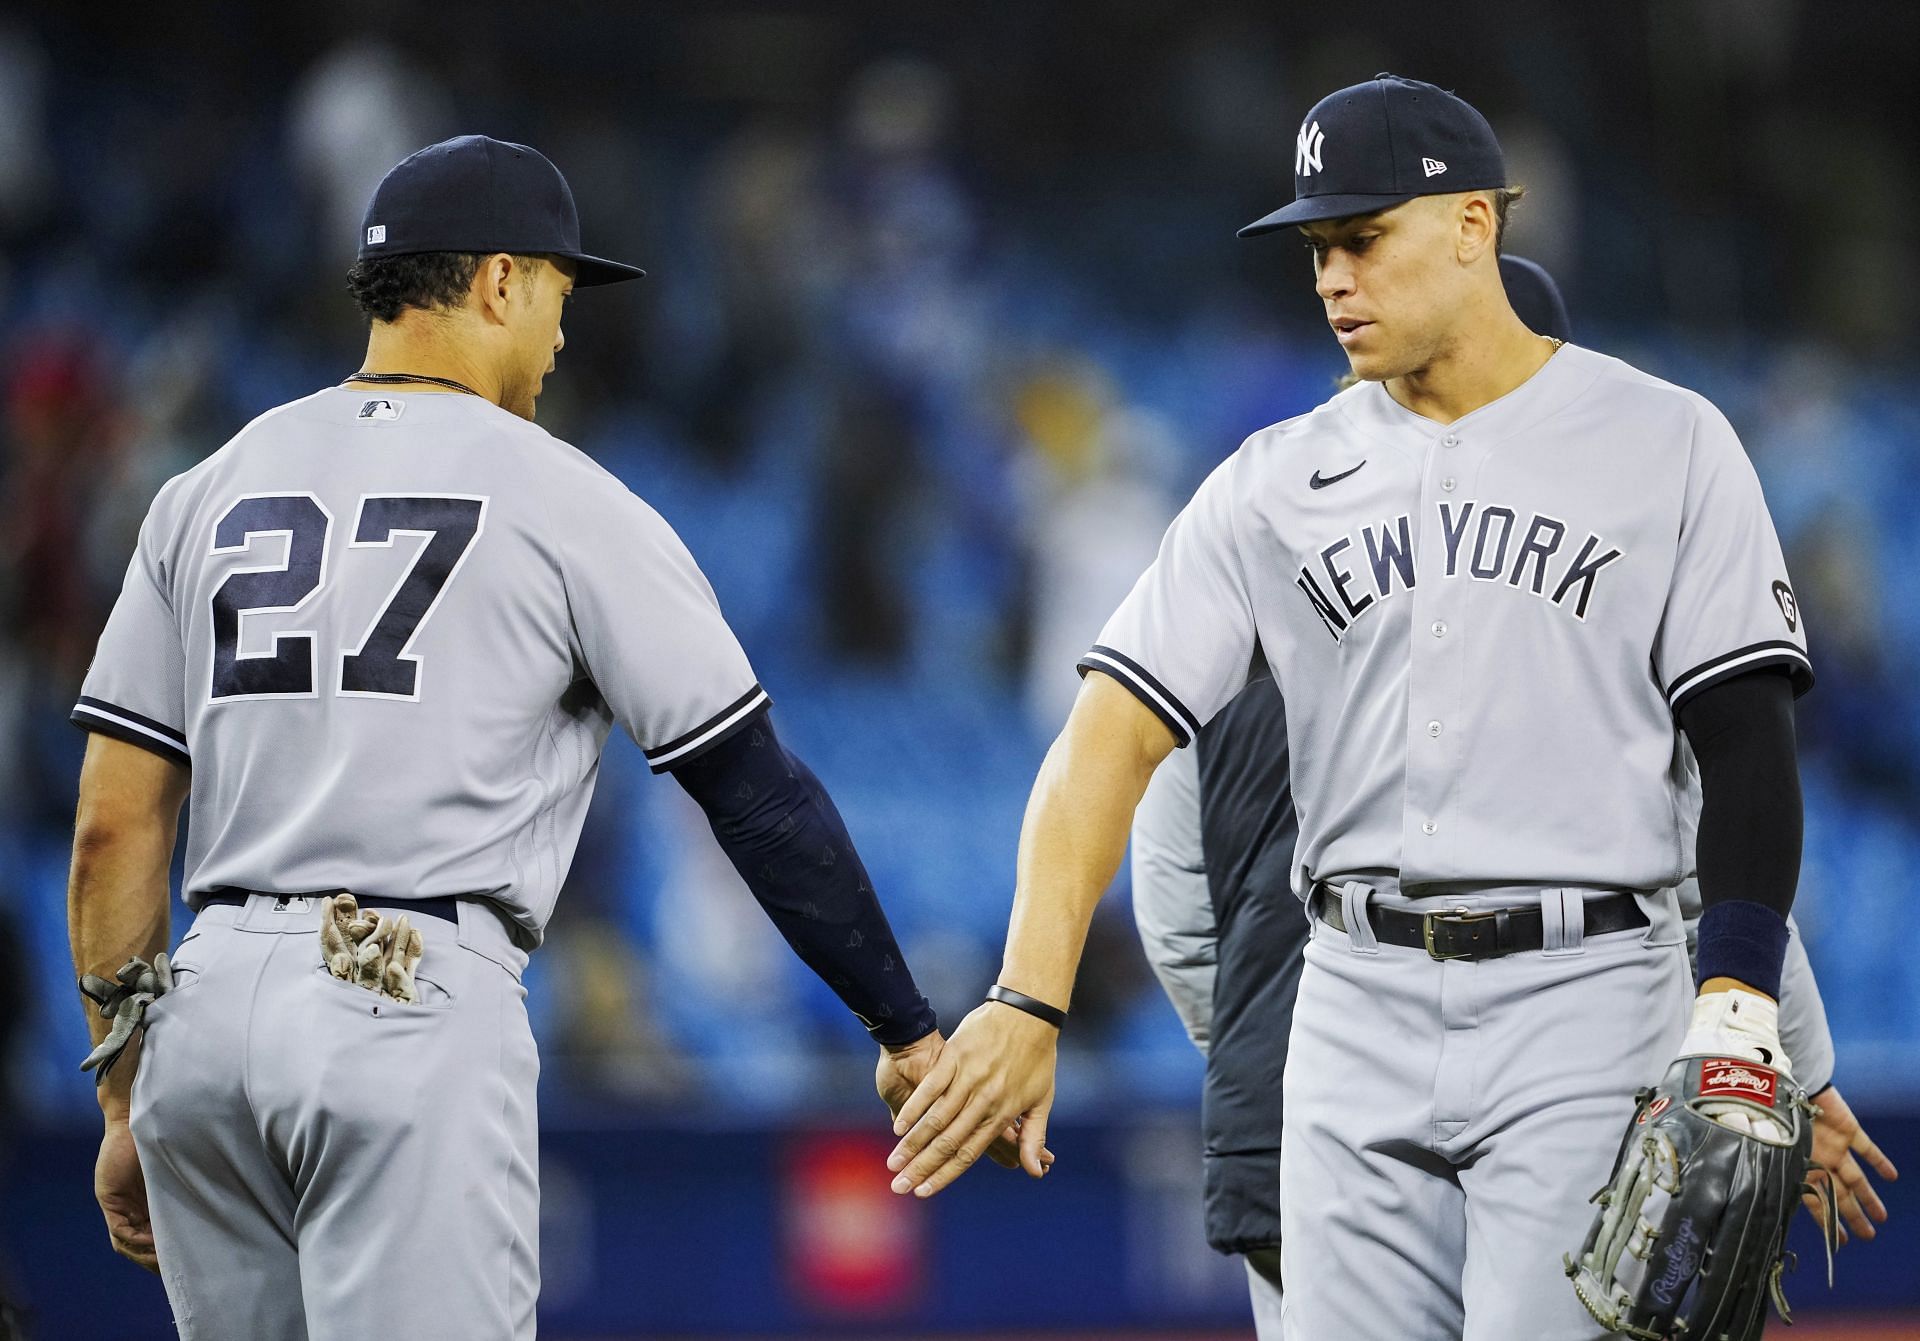 Aaron Judge and Giancarlo Stanton celebrate after defeating the Toronto Blue Jays.